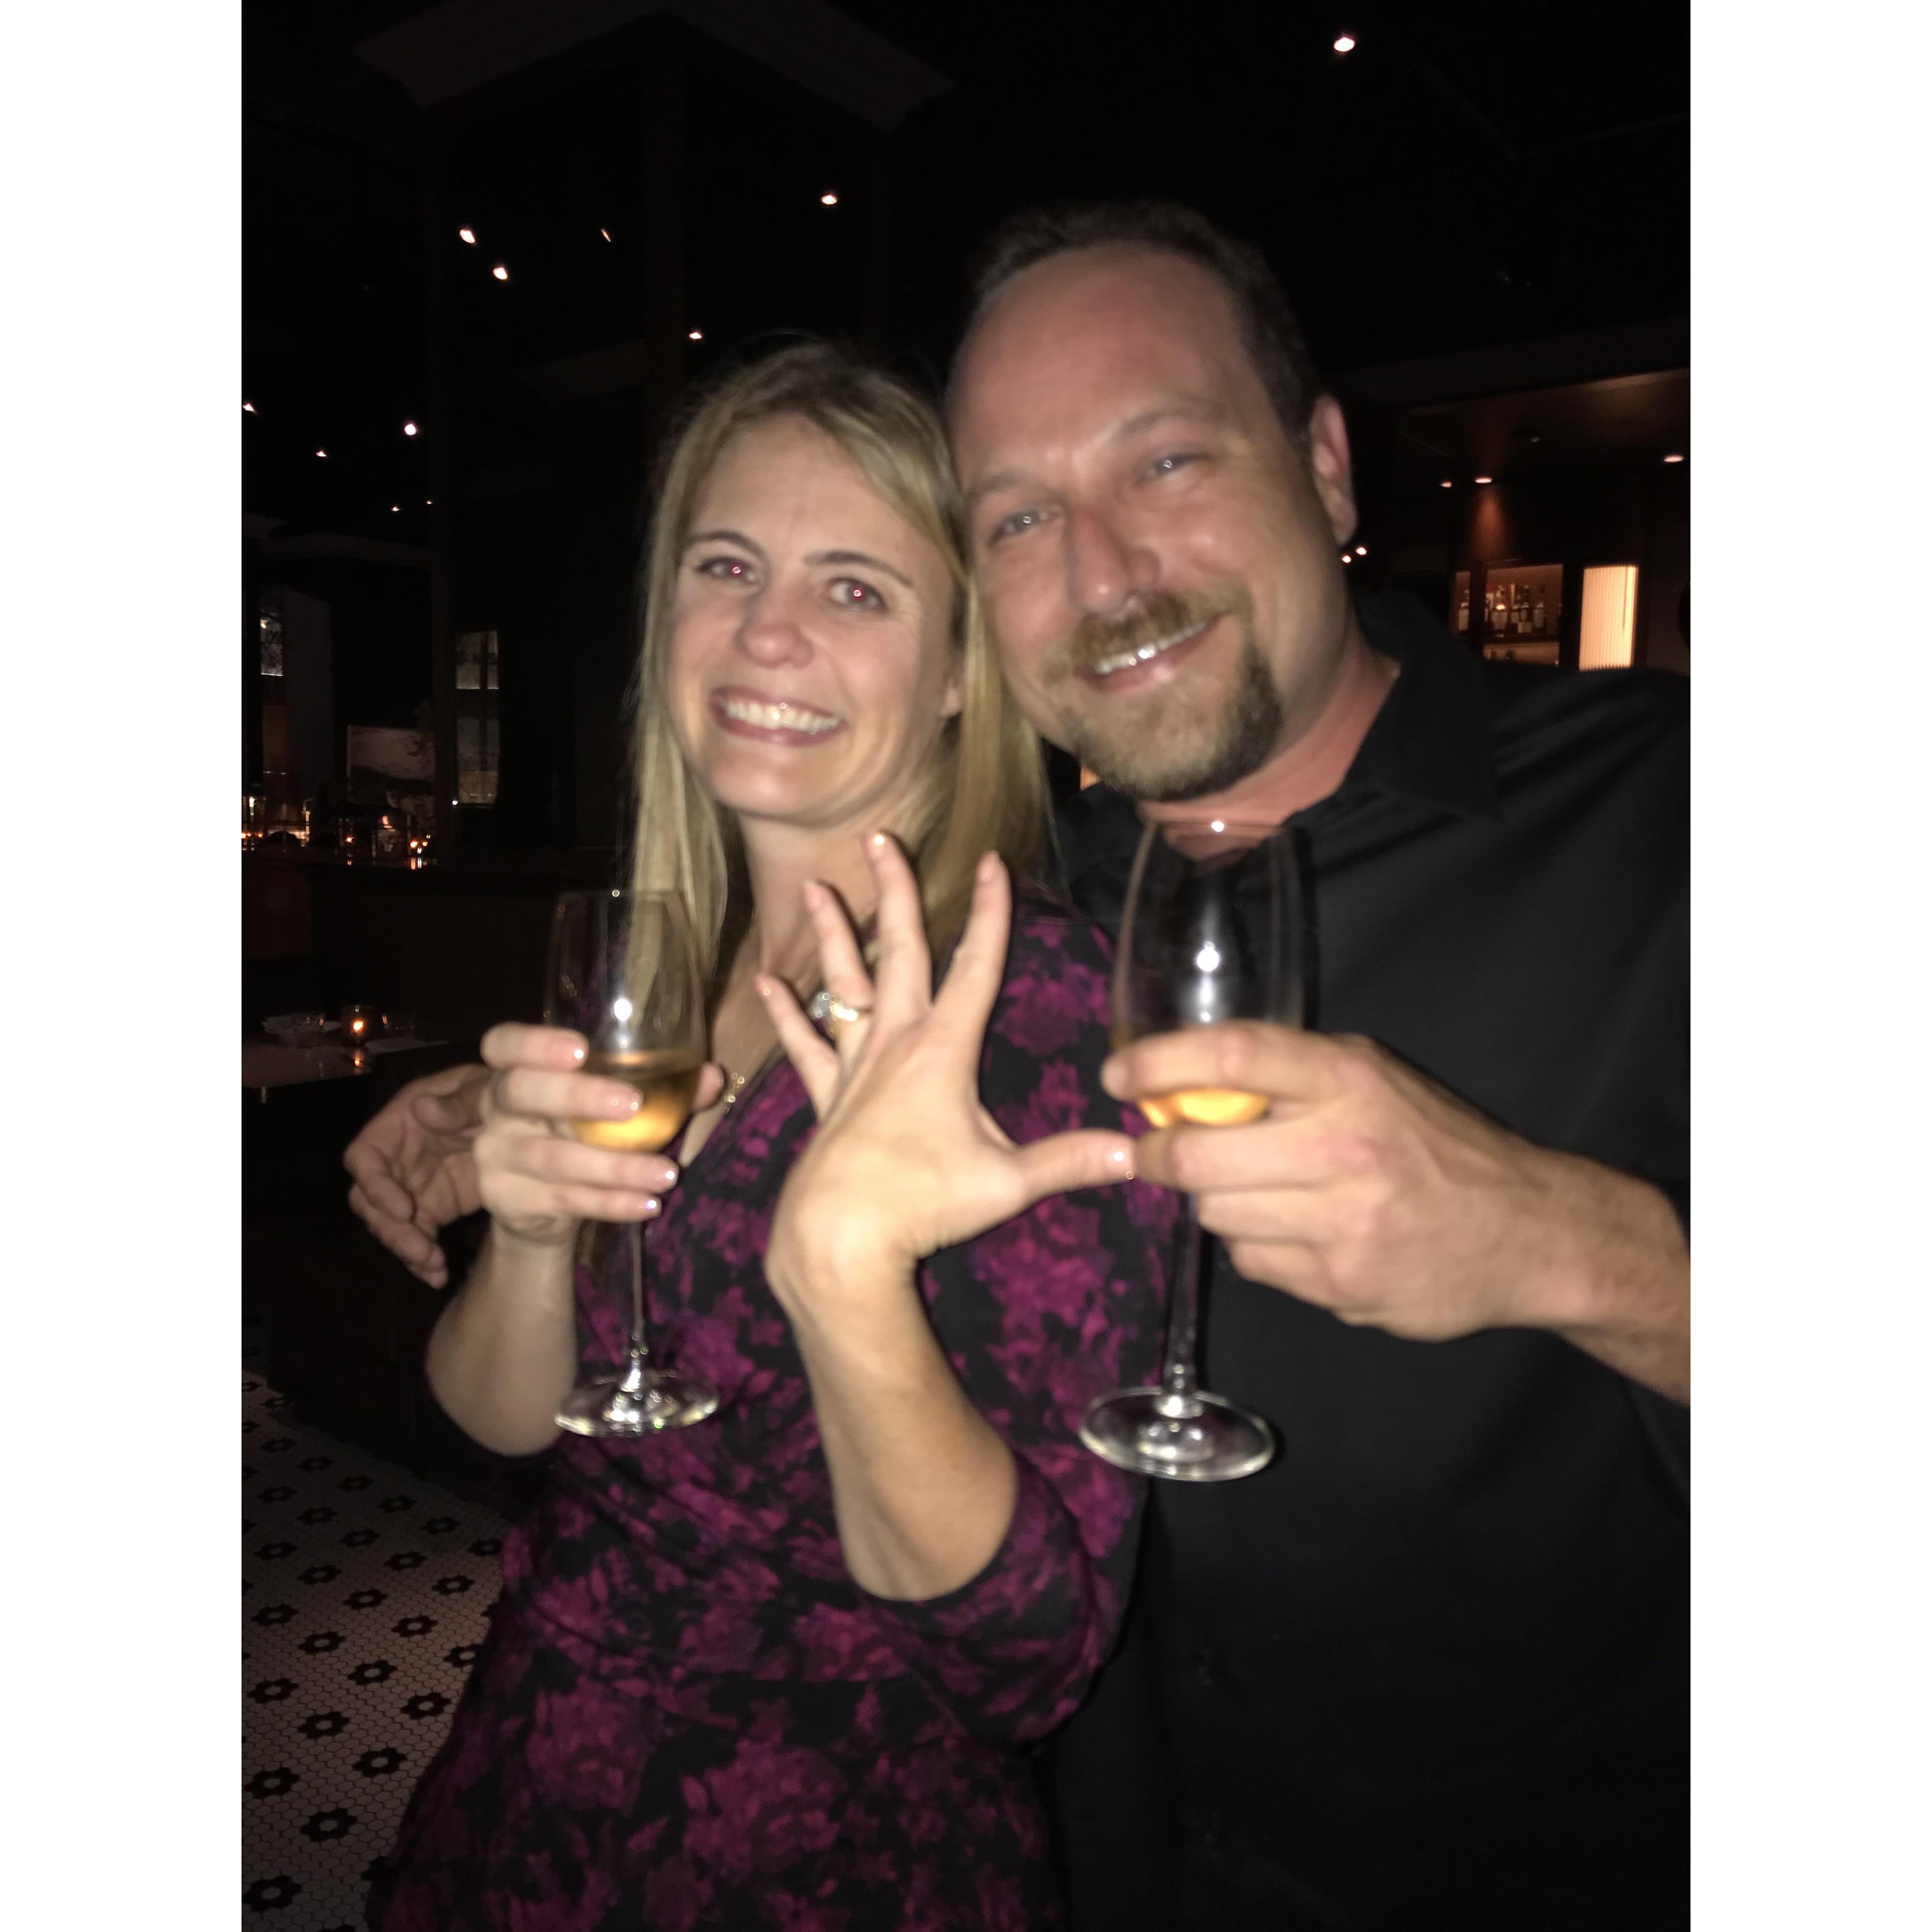 Engaged! Shout out to APL!